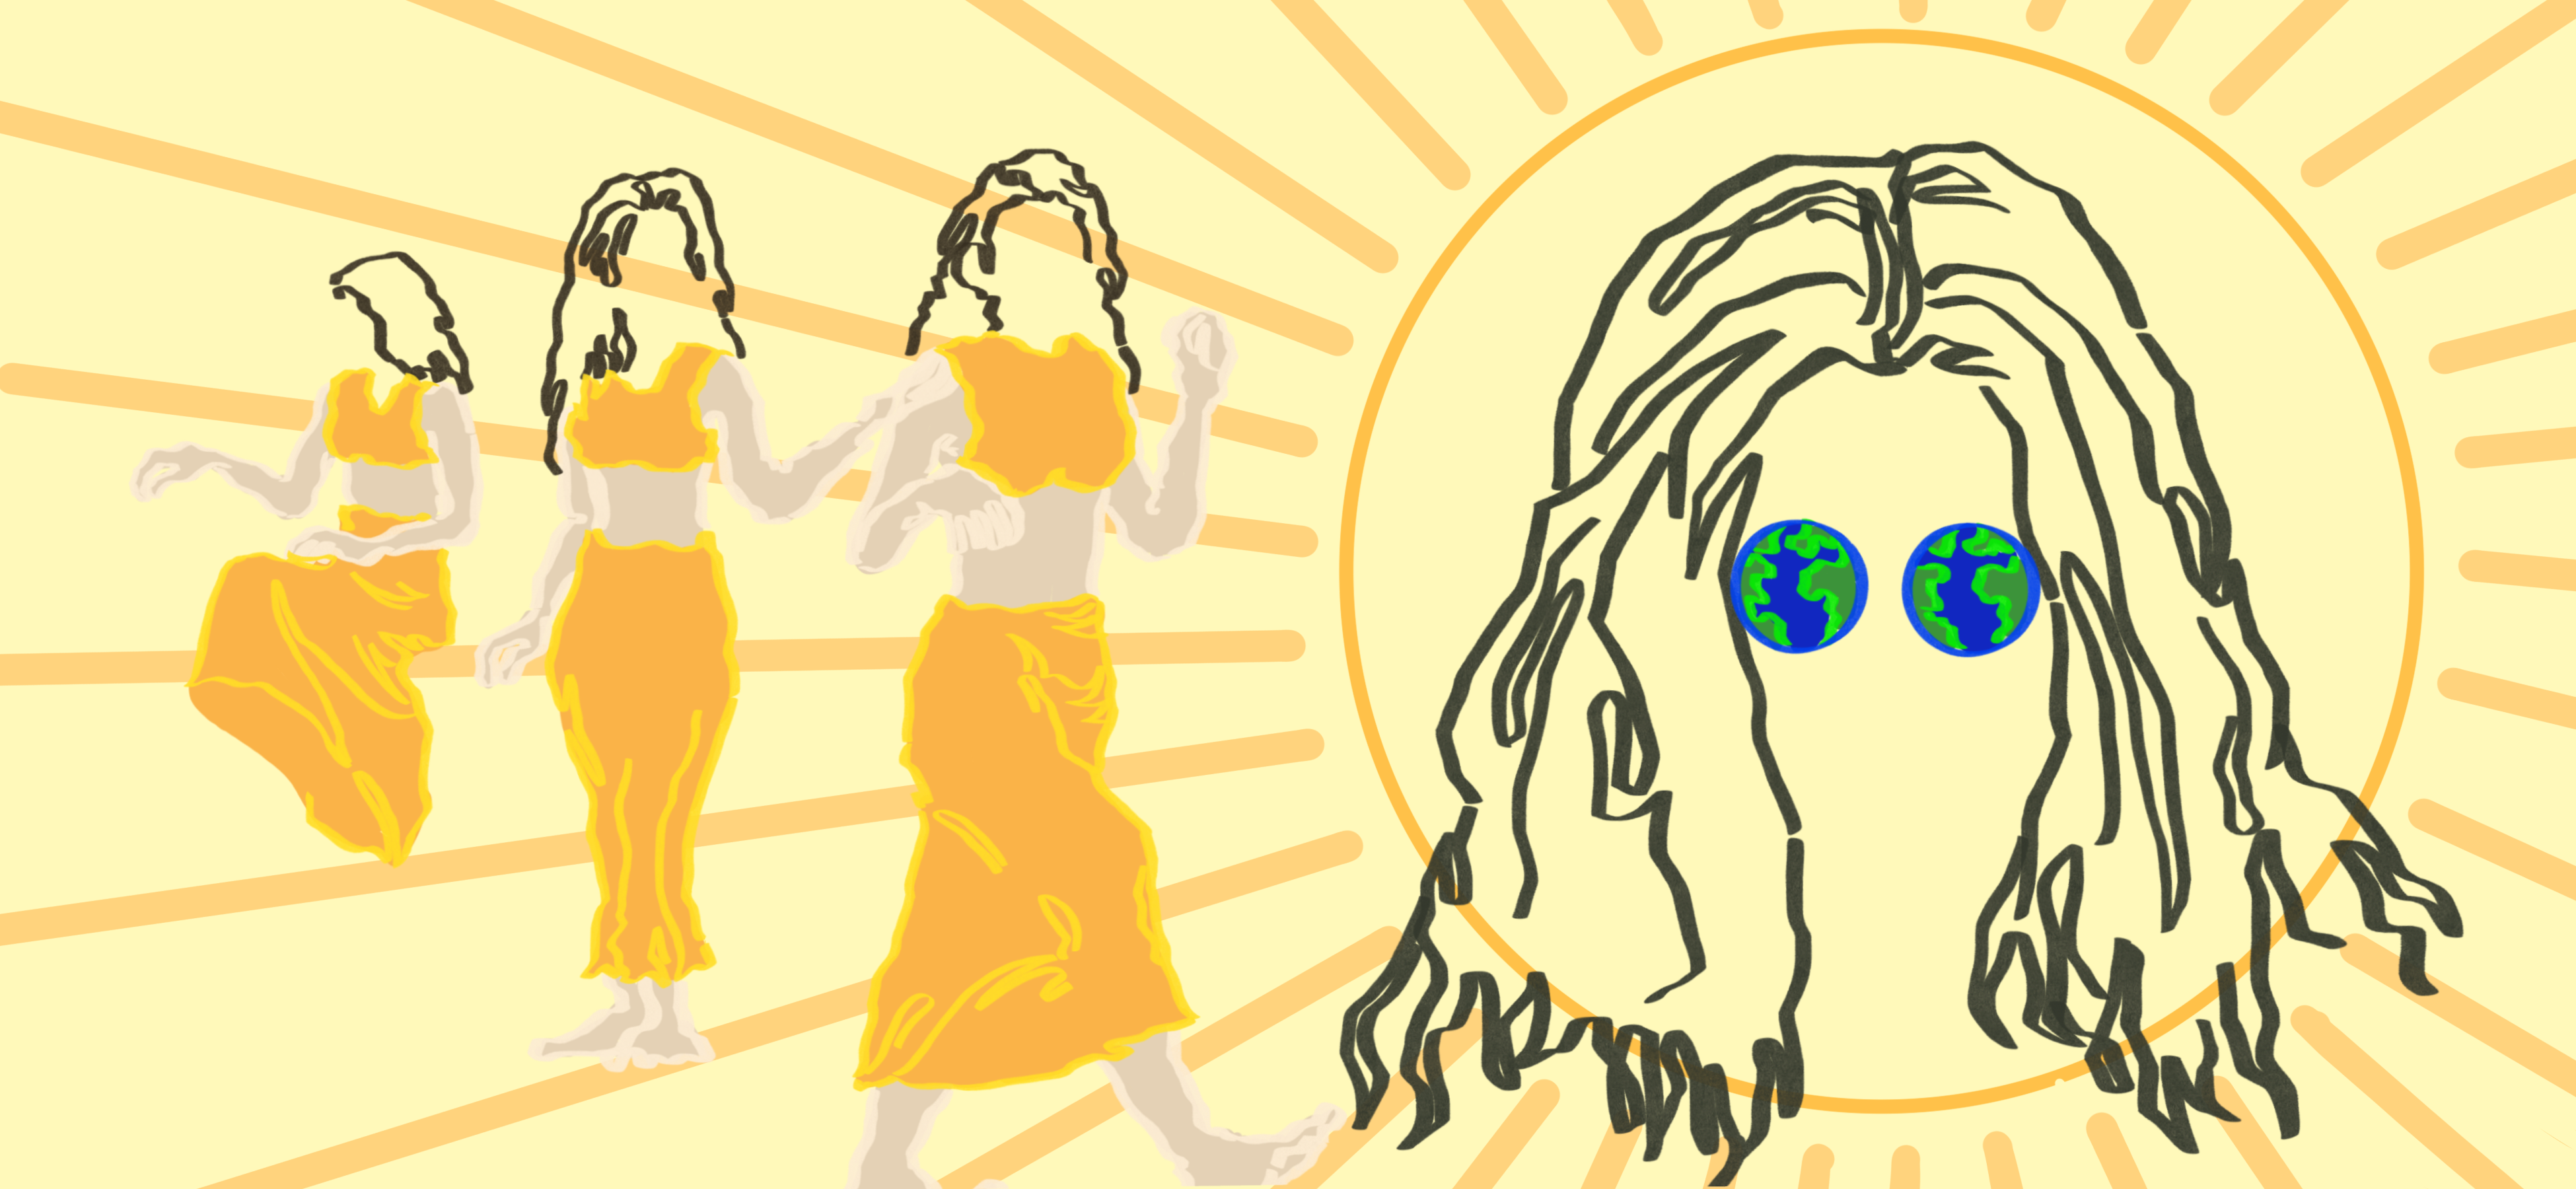 Thumbnail for Solar Power affirms Lorde’s musical versatility